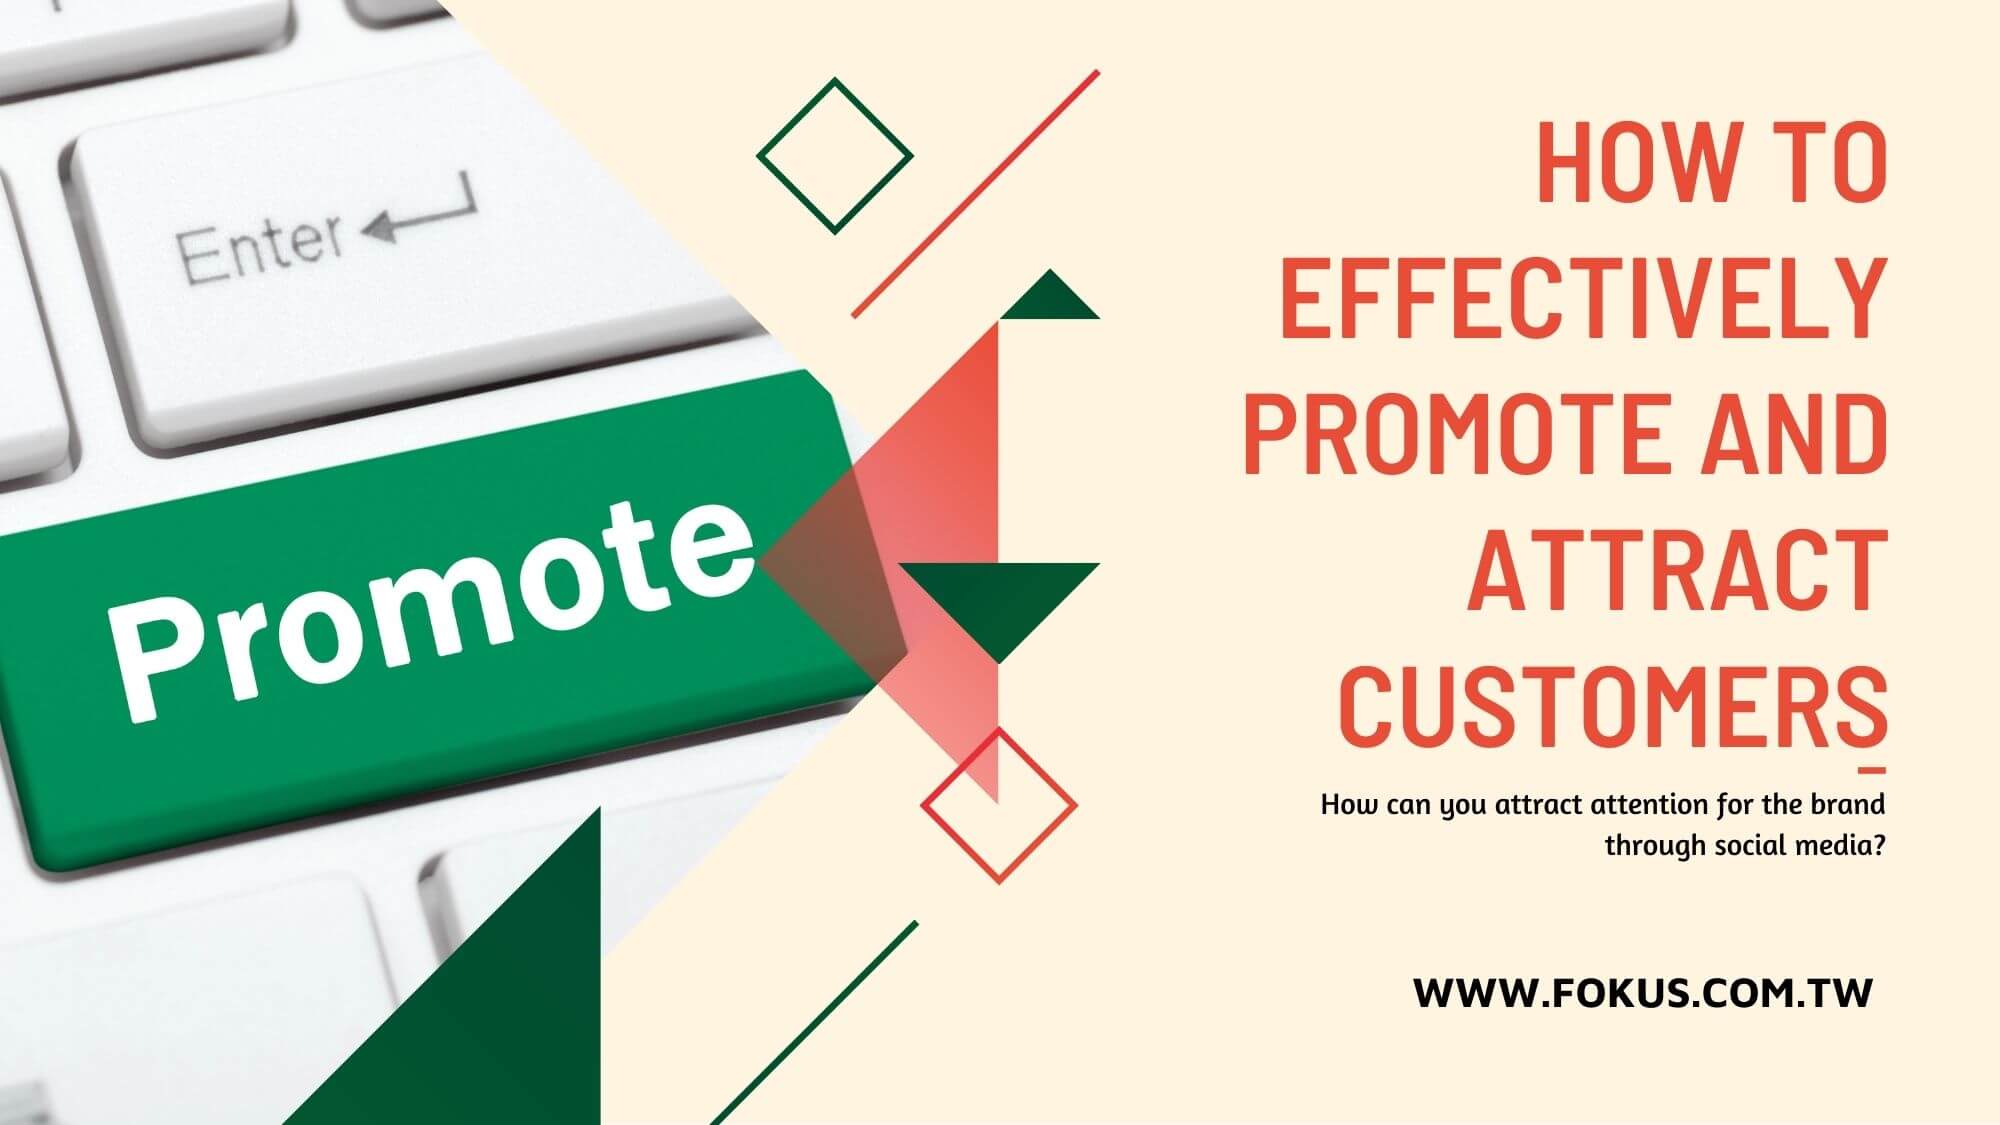 How to effectively promote and attract customers